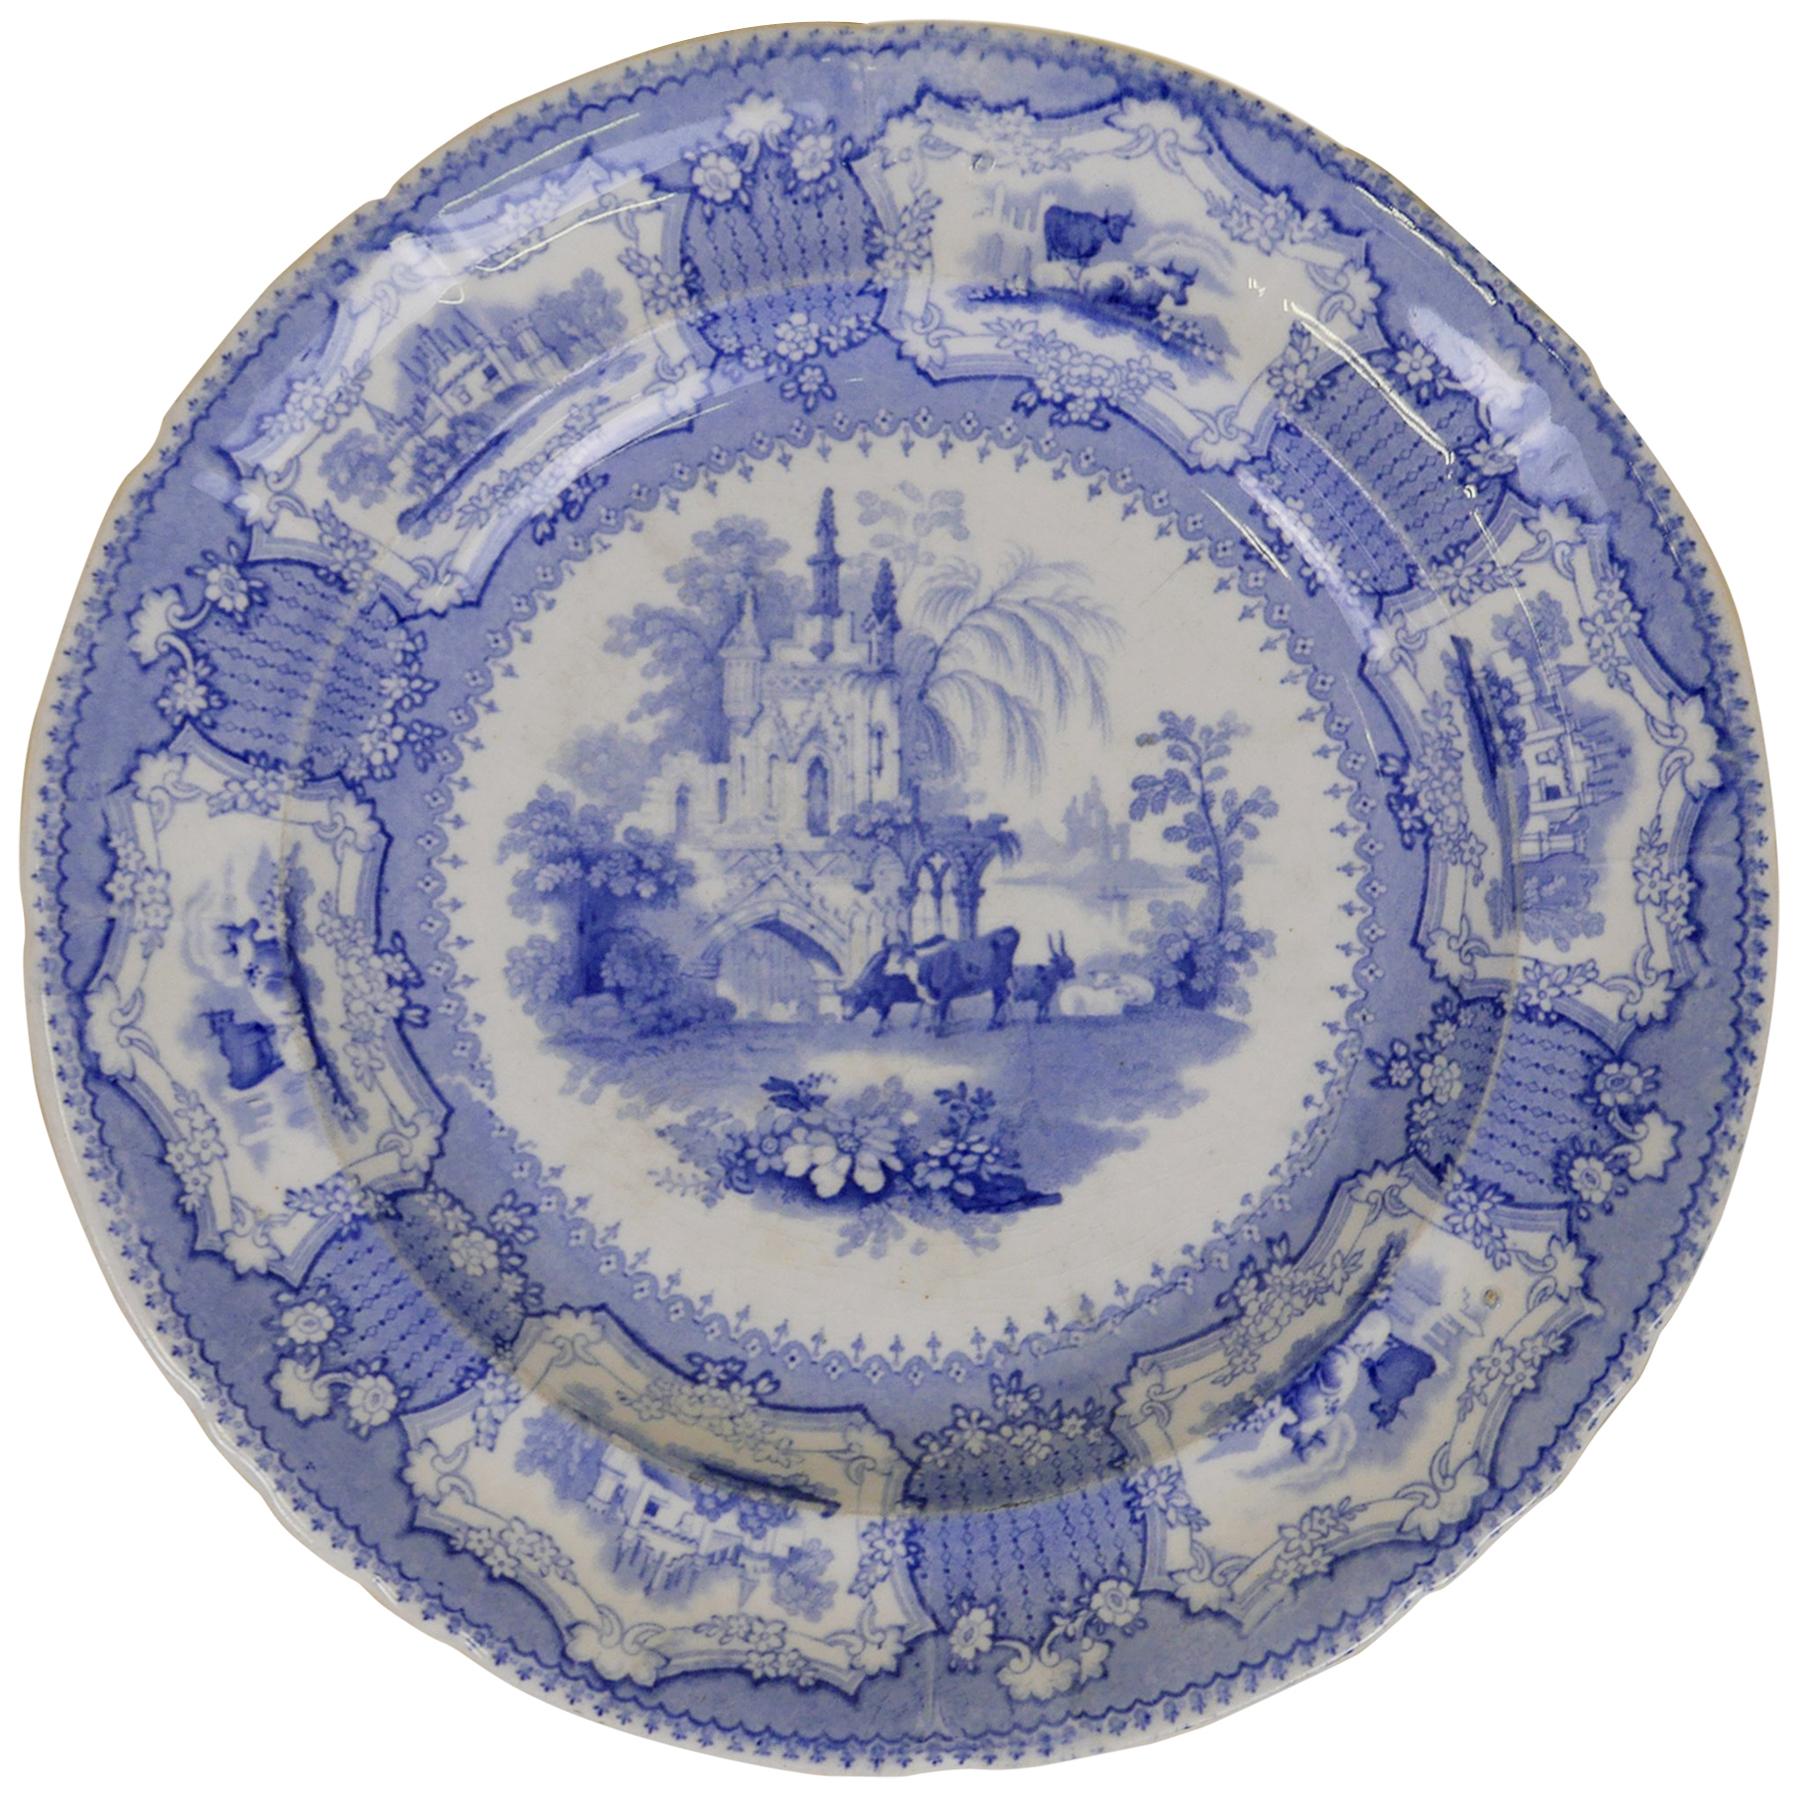 1840s English Blue and White Transfer Earthenware Arcadia Pattern Dinner Plate For Sale